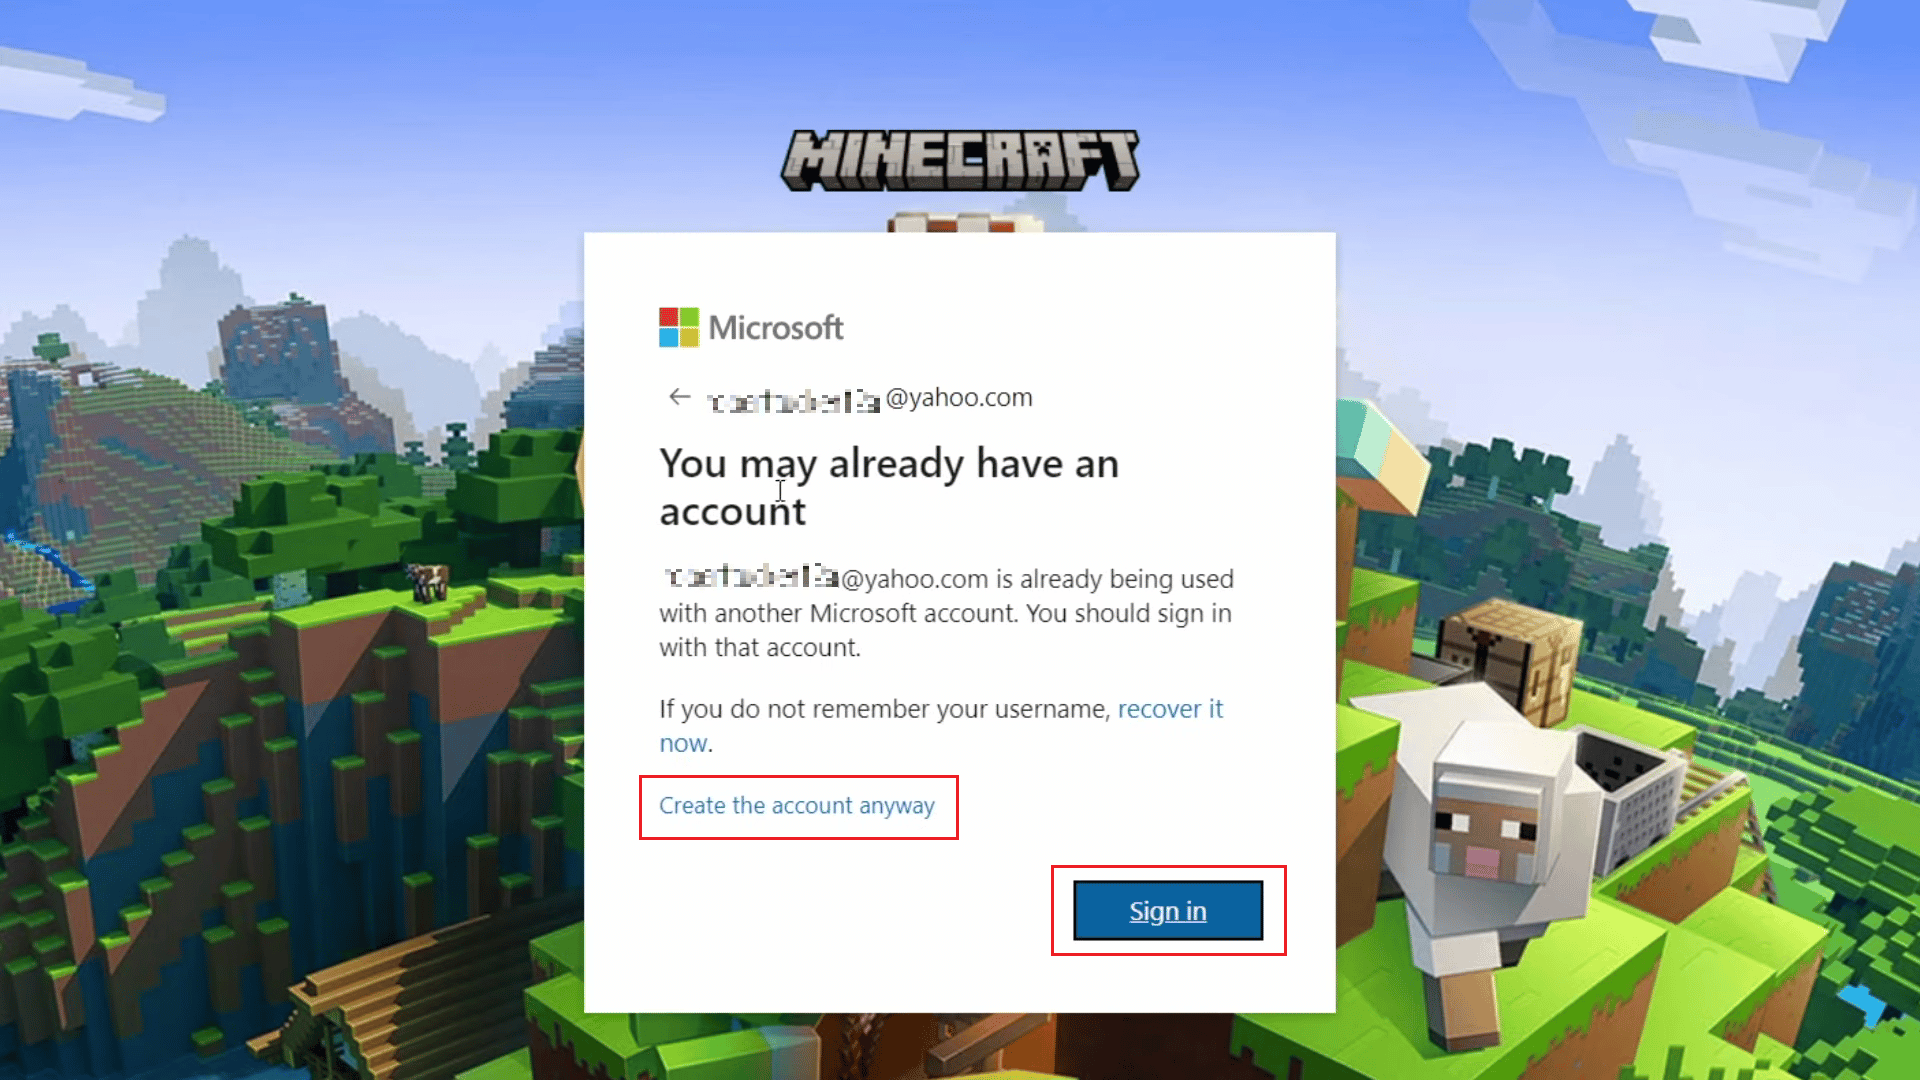 click on Sign in and follow the onscreen instructions to sign into your account OR Create the account anyway if the Mincraft account is not your Microsoft account